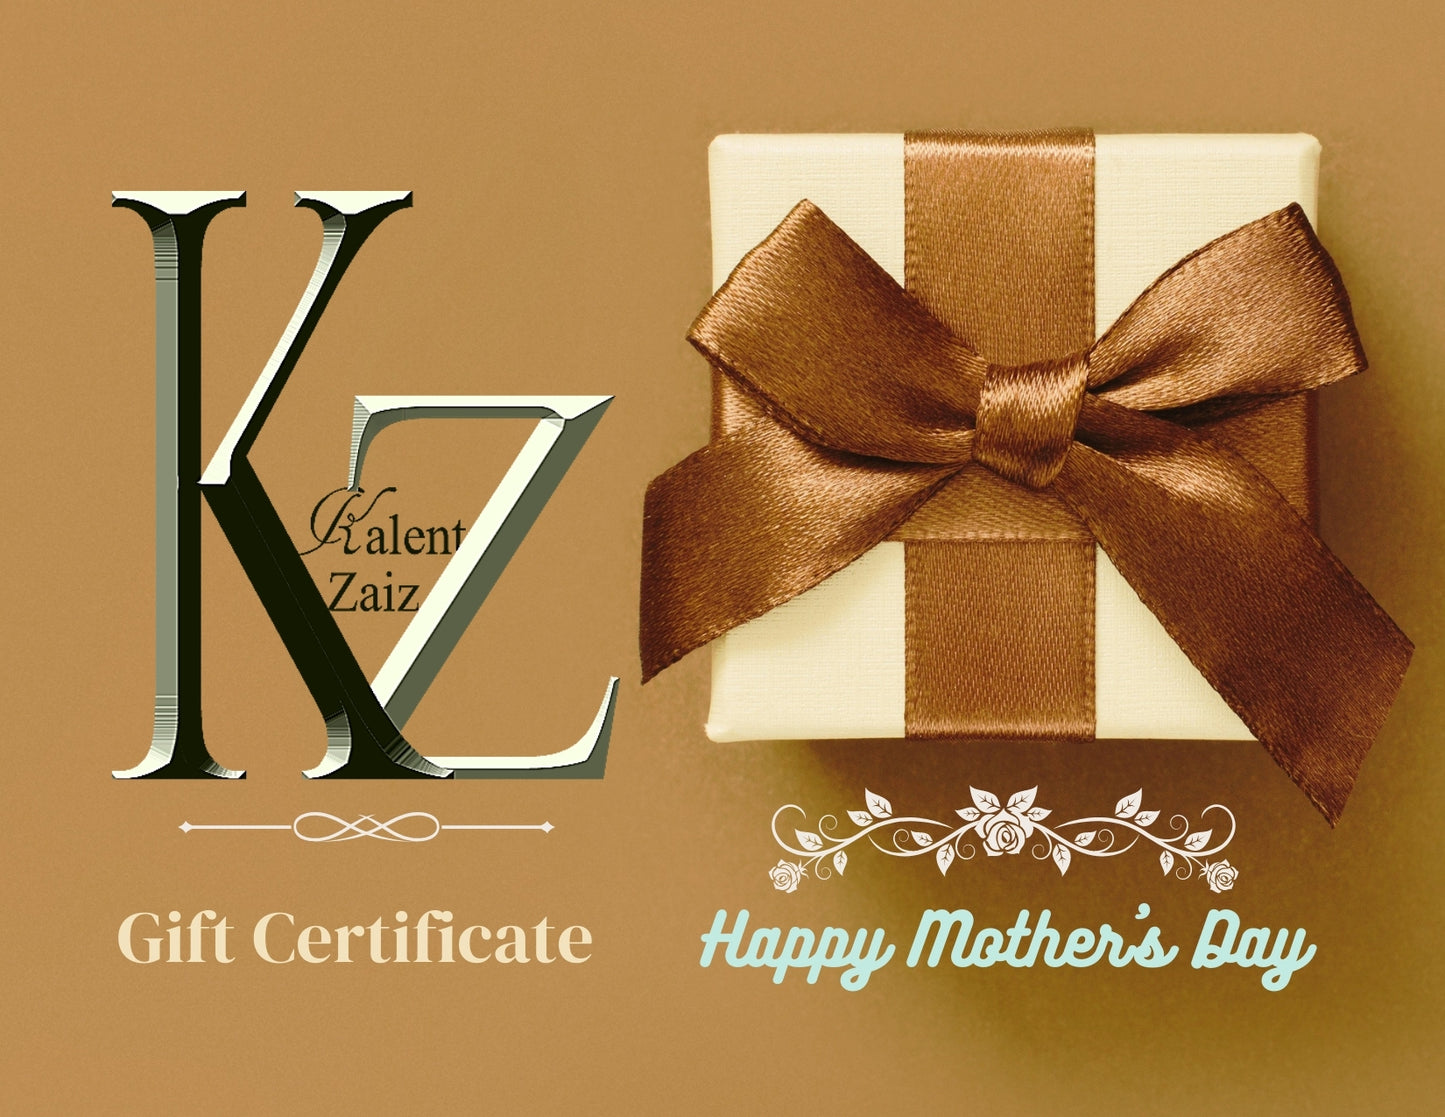 Happy Mother's Day (Gift Certificate)